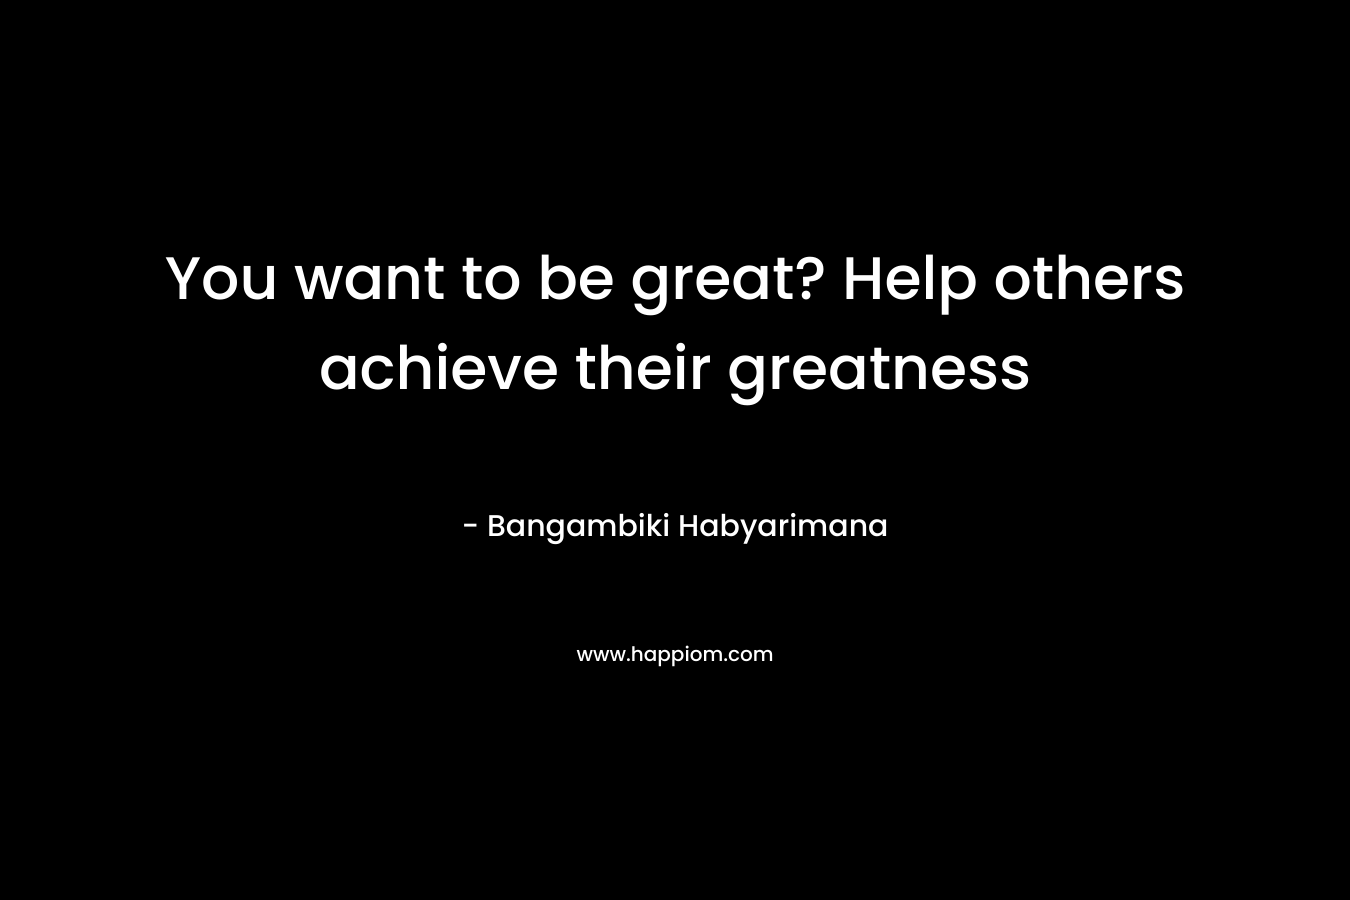 You want to be great? Help others achieve their greatness